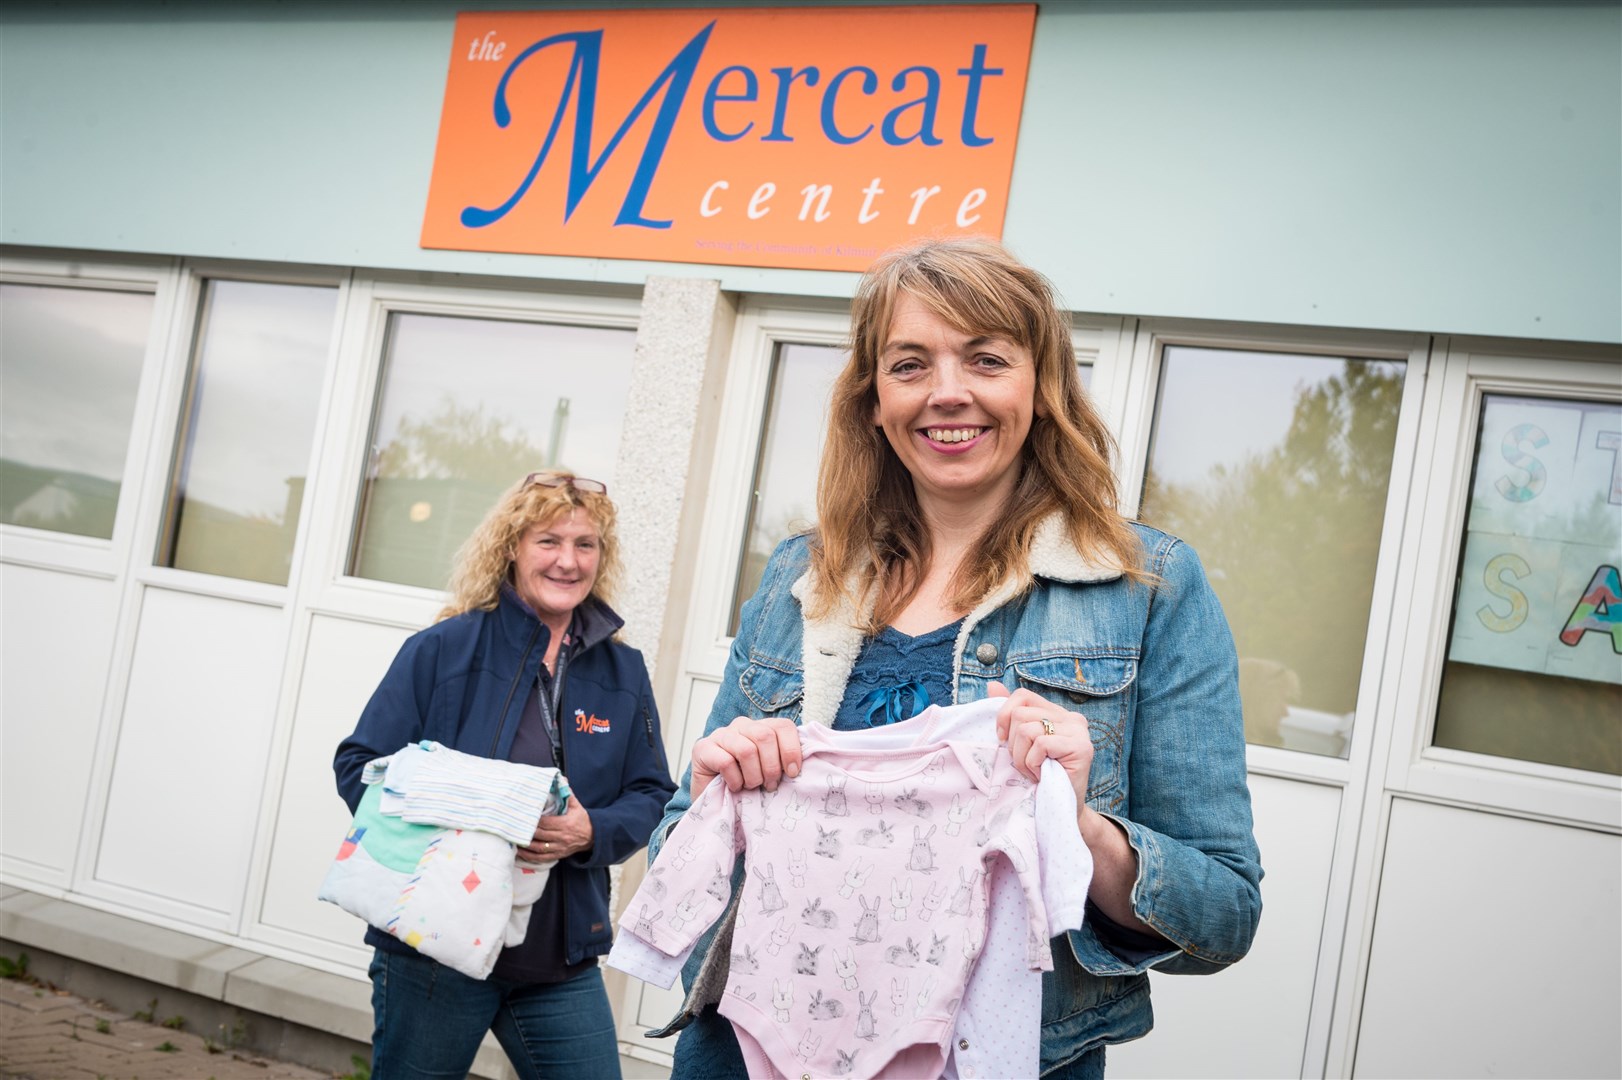 Dawn Aird of Kildary is organising a collection of baby clothes for a children's hospital in Yemen. She's pictured with Mercat Centre manager Mairi Crow. Picture: Callum Mackay